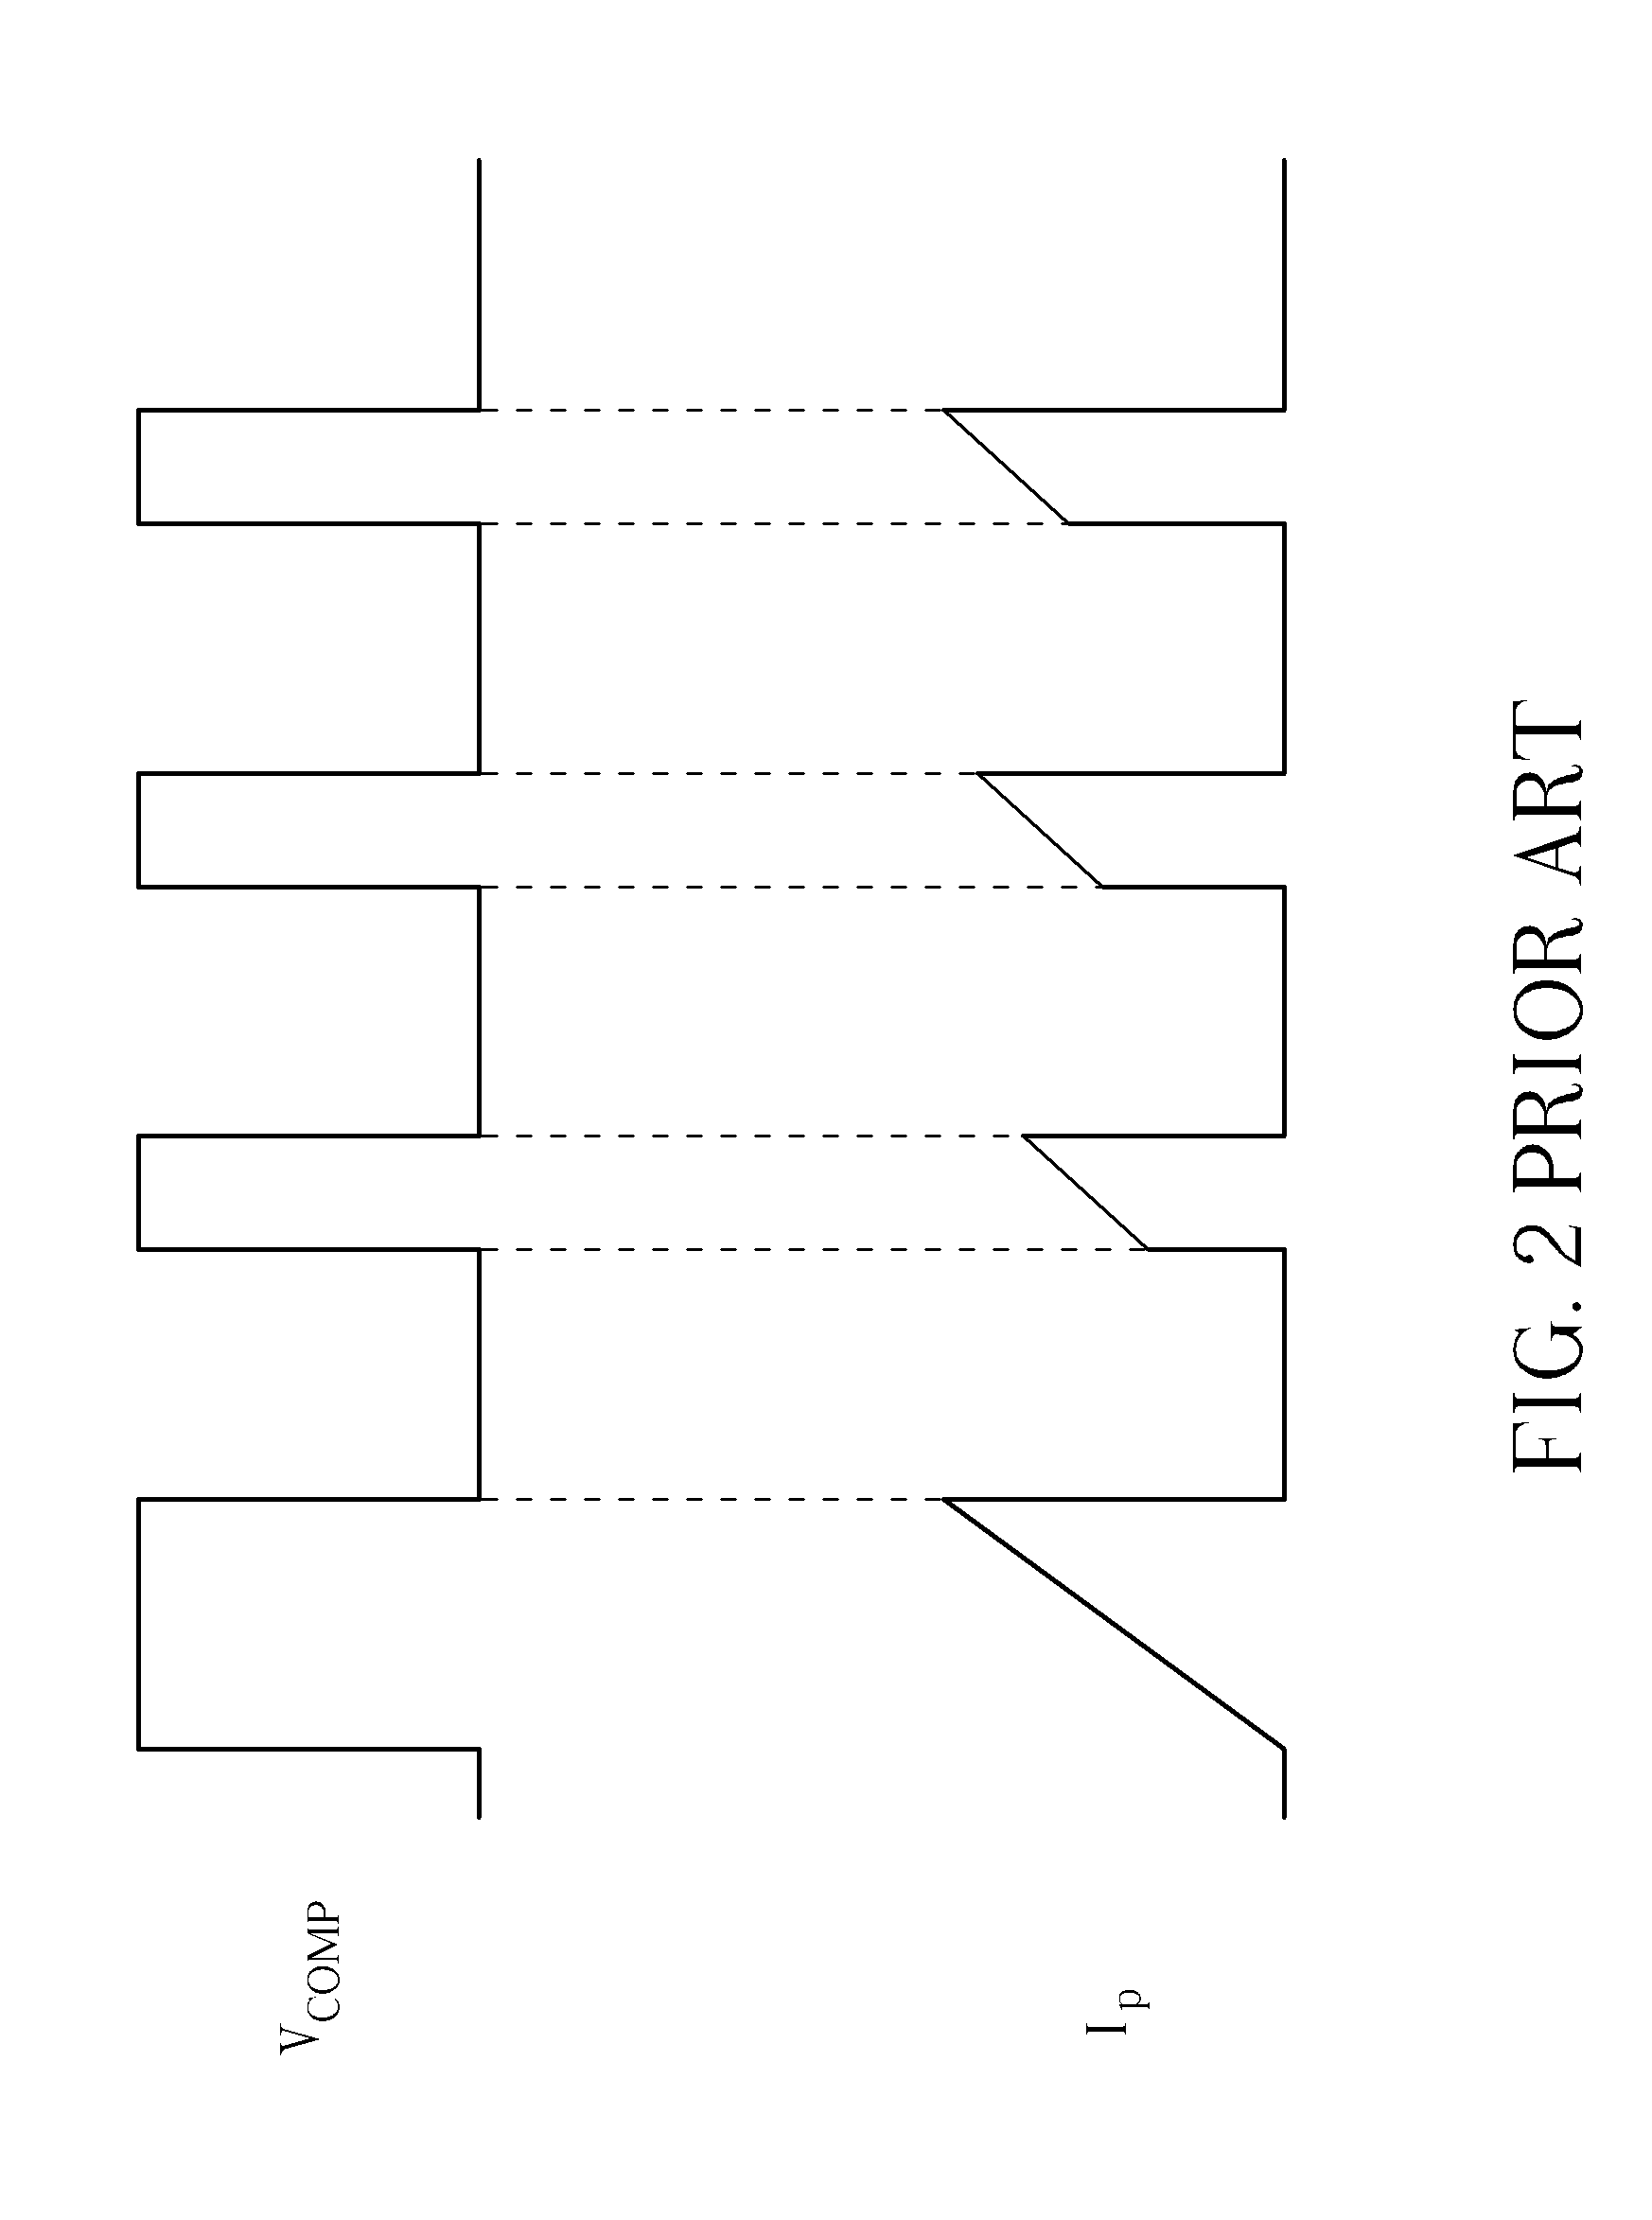 Control circuit of a switched-mode power converter and method thereof